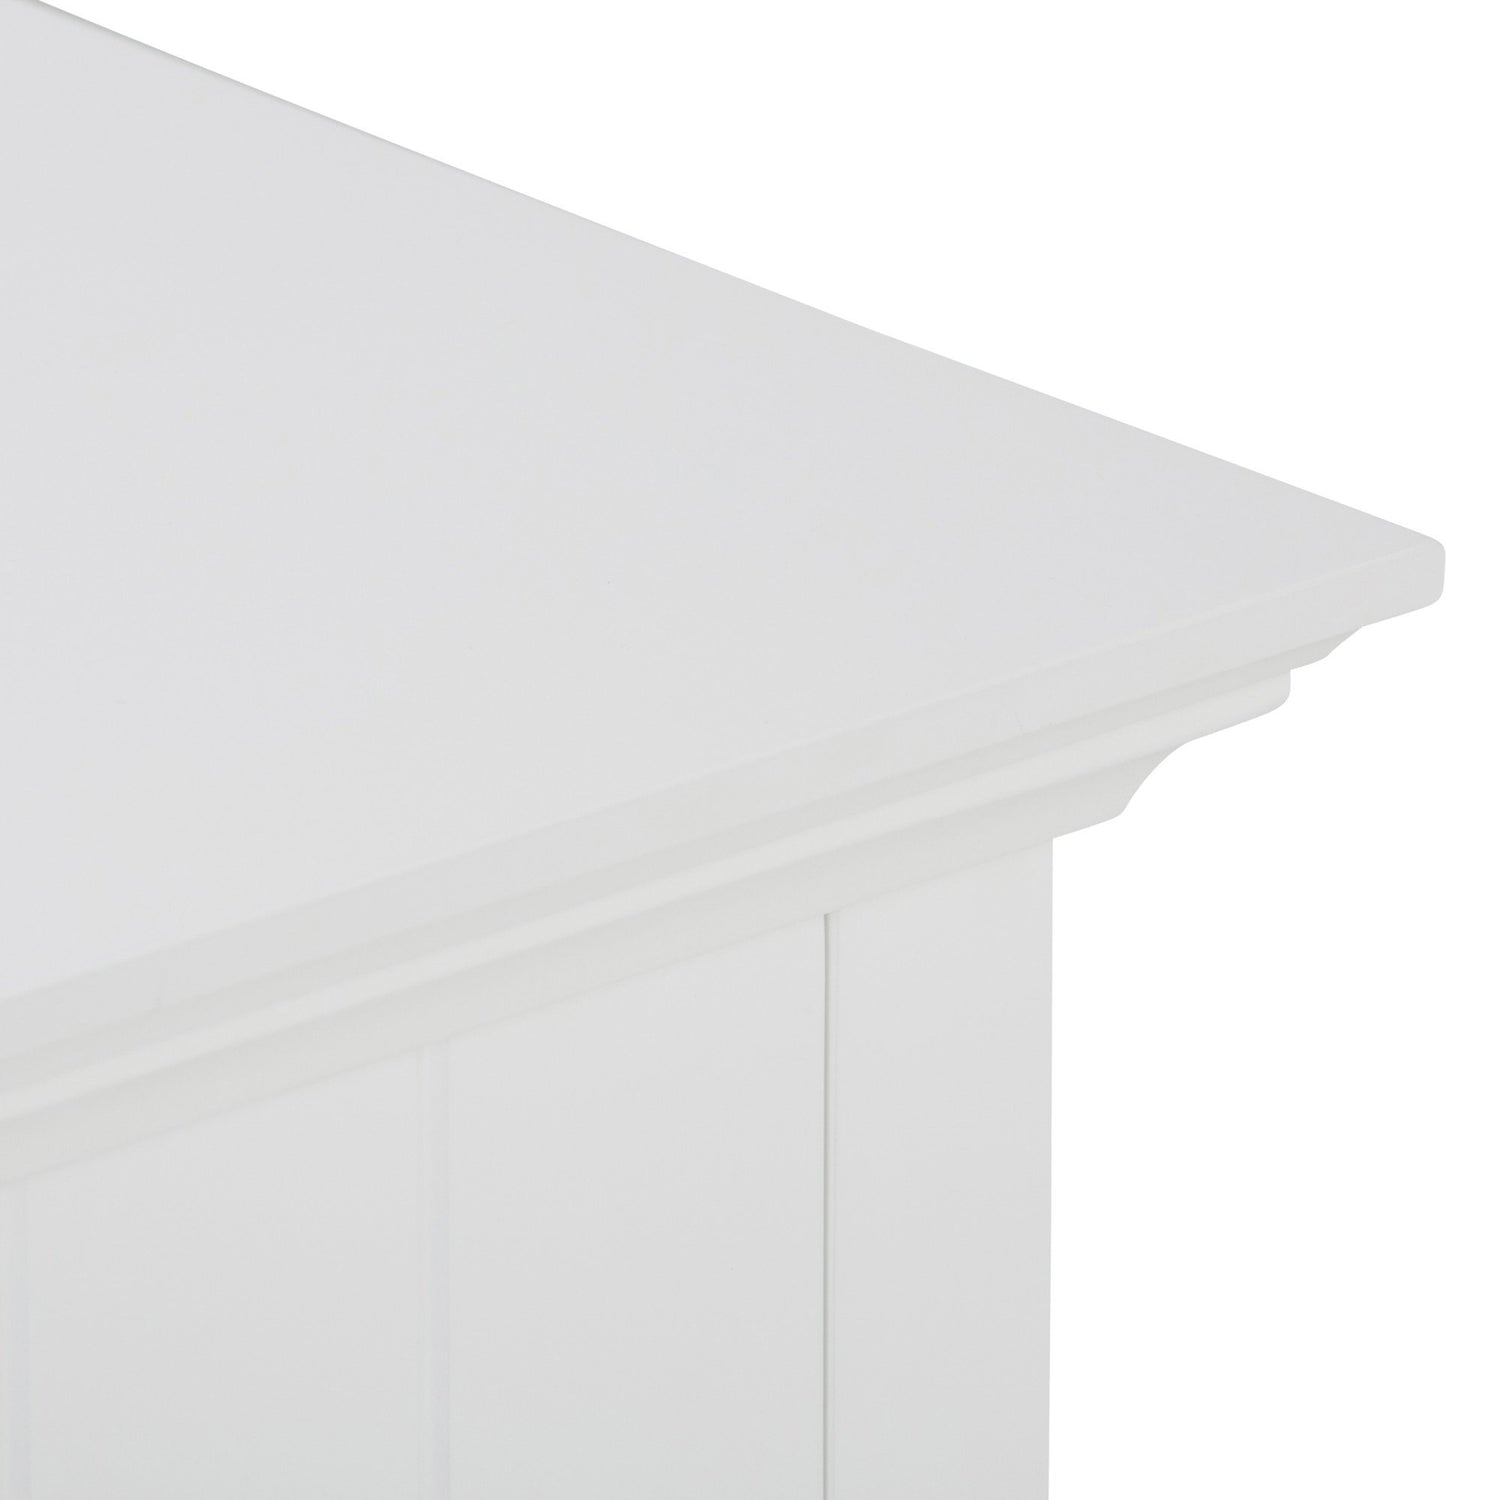 Pure White | Acadian Four Drawer Floor Cabinet